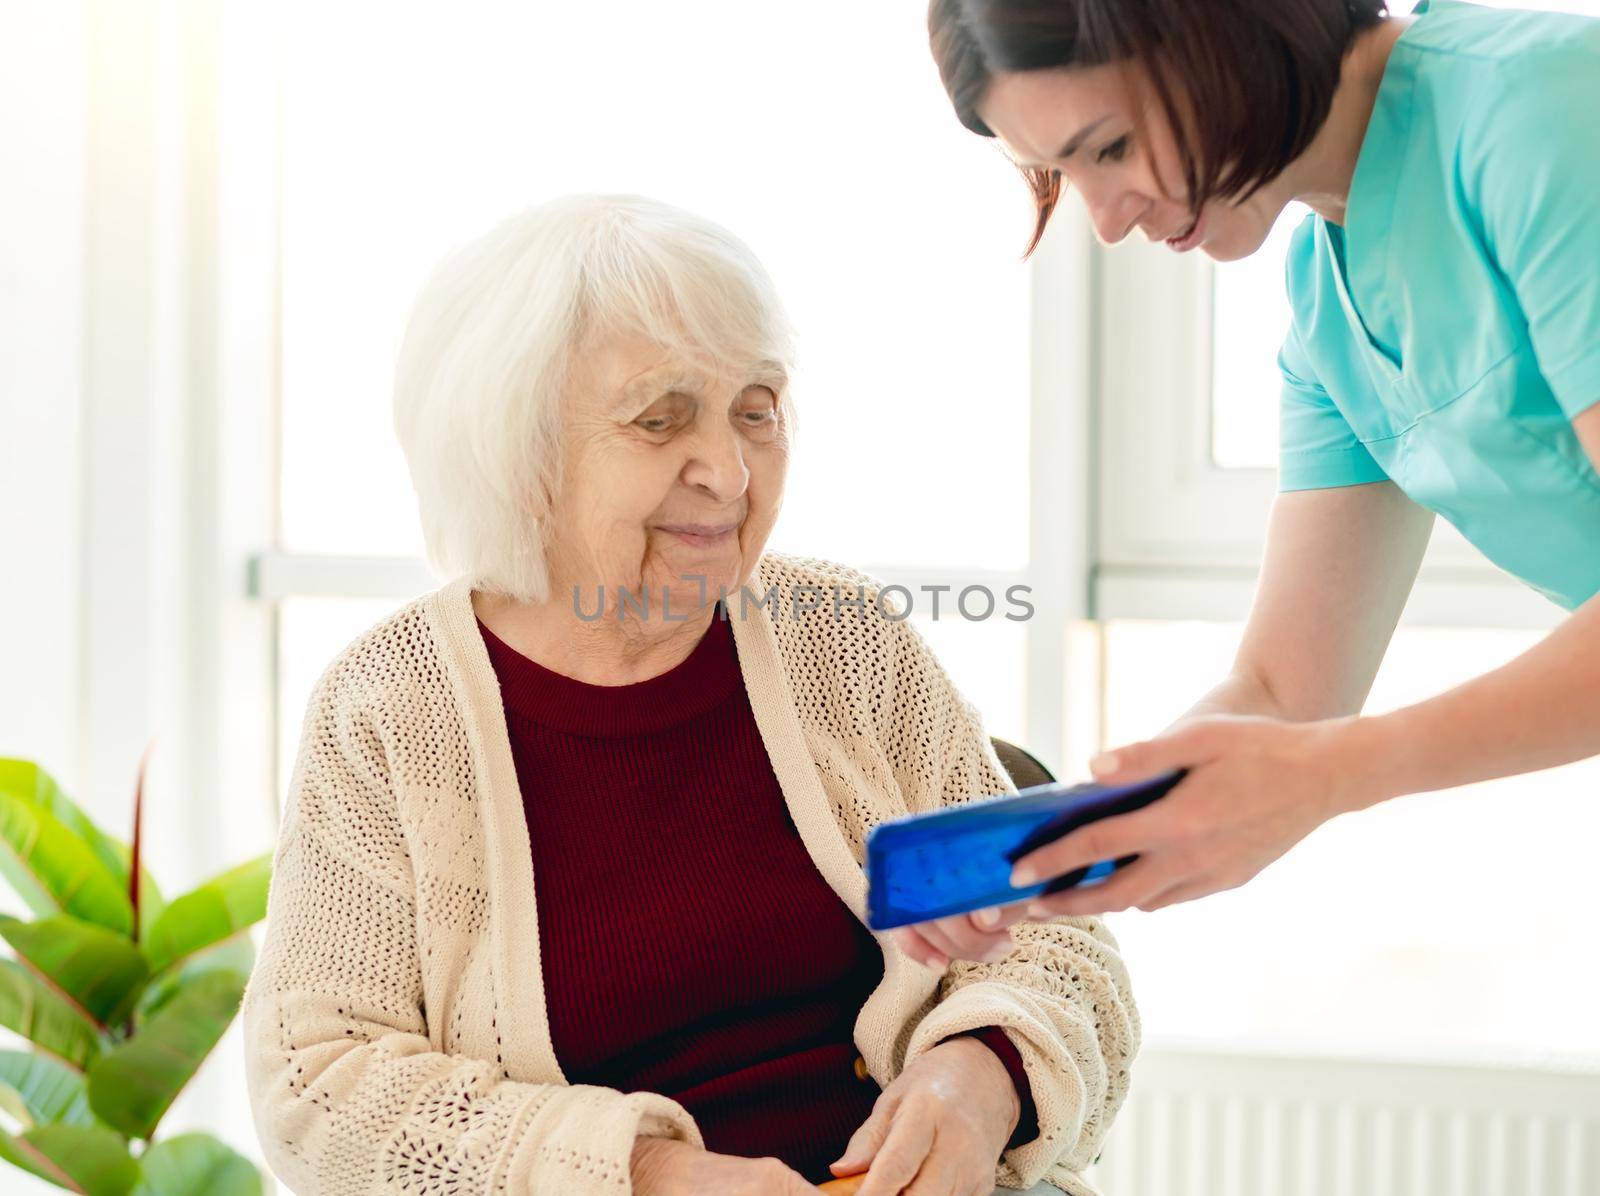 Caregiver showing phone screen to old woman patient in nursing home